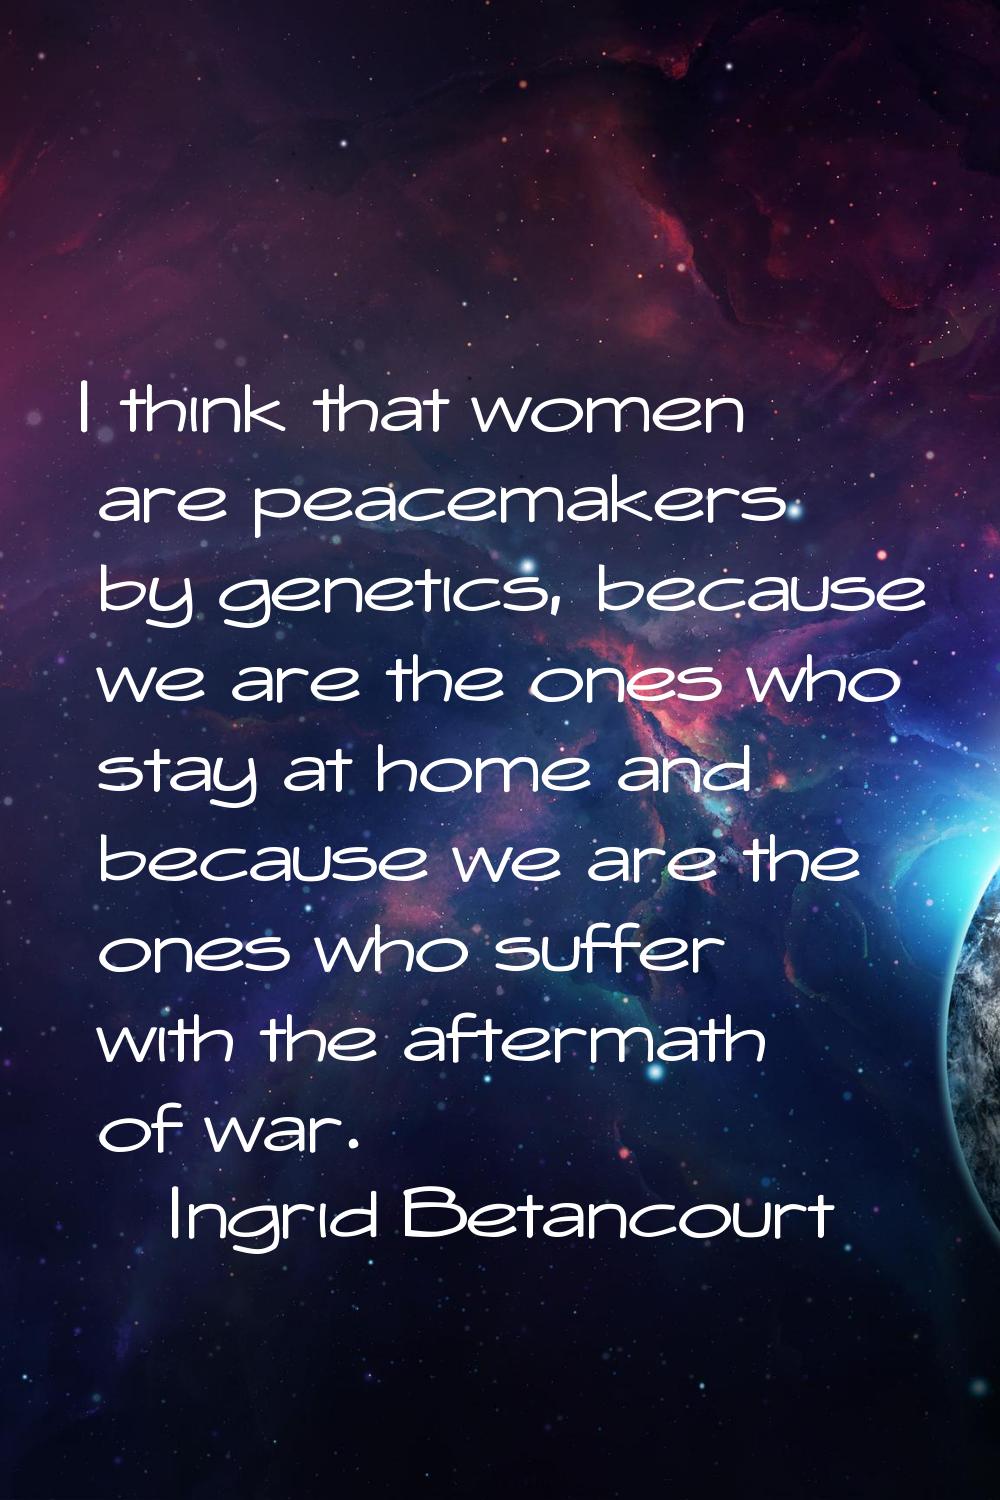 I think that women are peacemakers by genetics, because we are the ones who stay at home and becaus